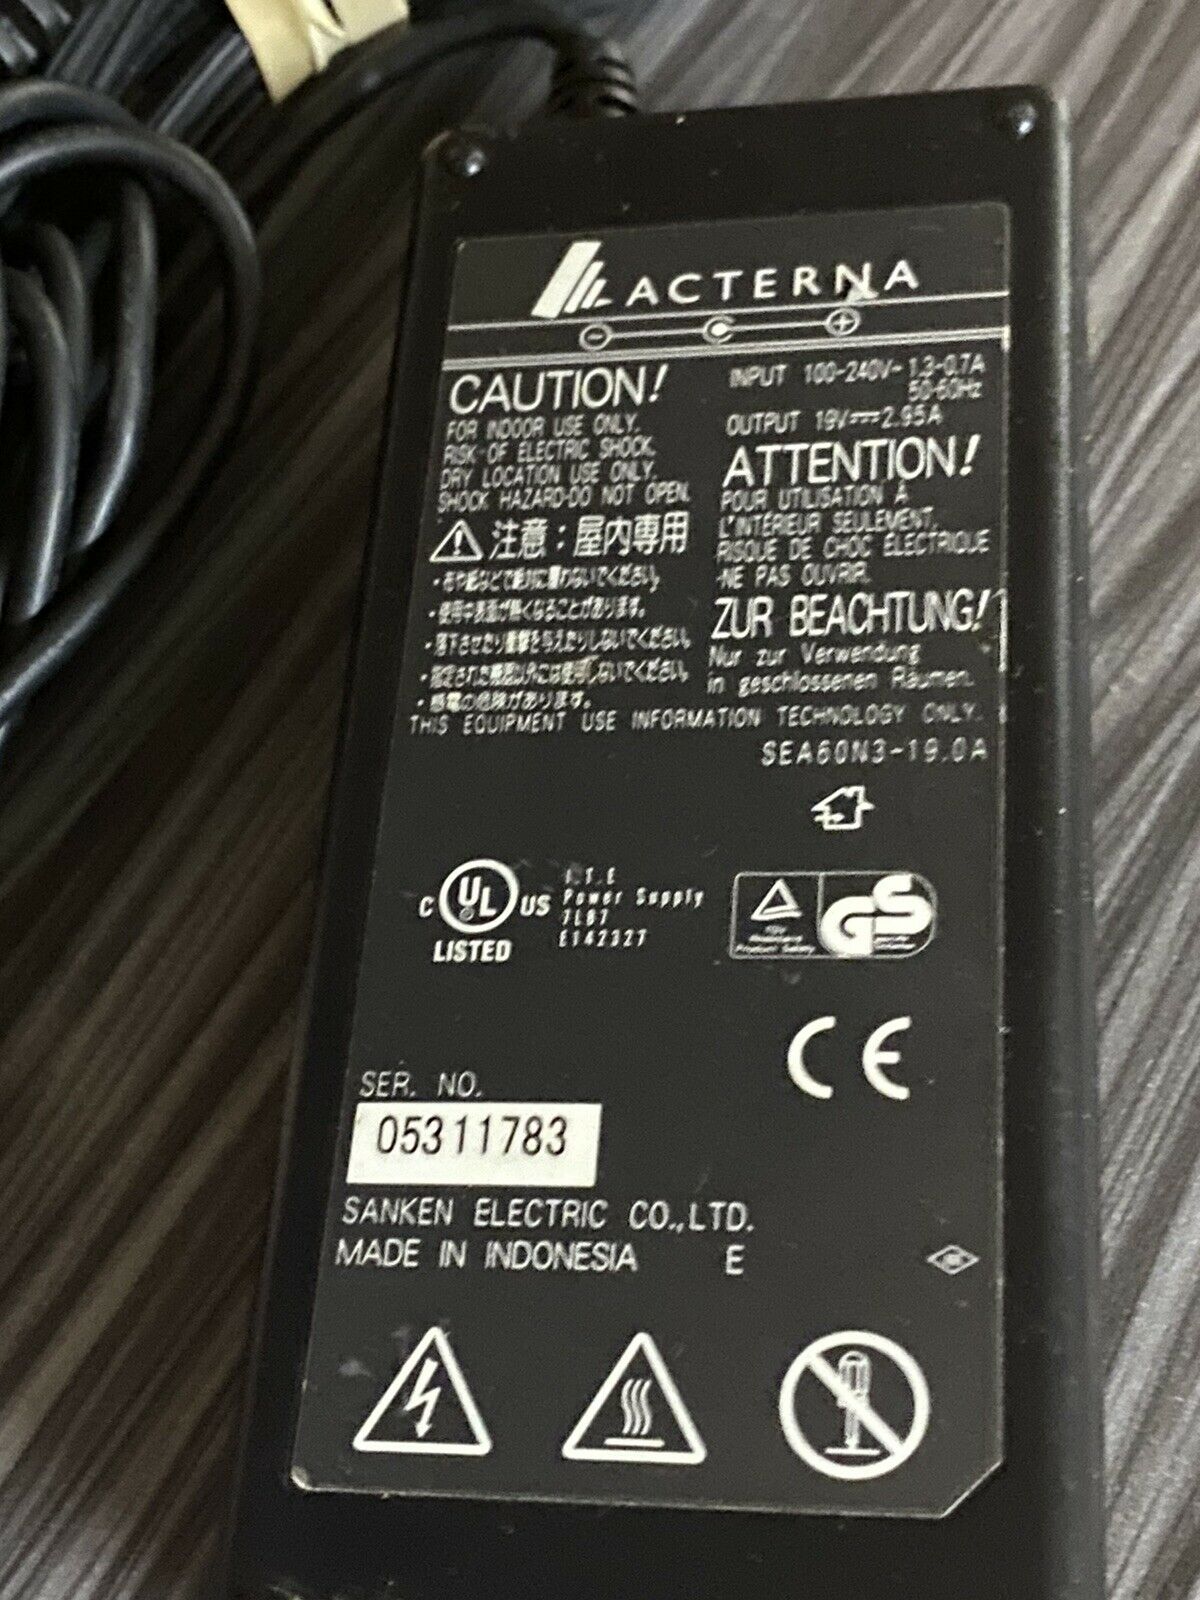 *Brand NEW*Genuine JDSU SEA60N3-19A Acterna 19V 2.95A w/P.Cord OEM AC Adapter Charger